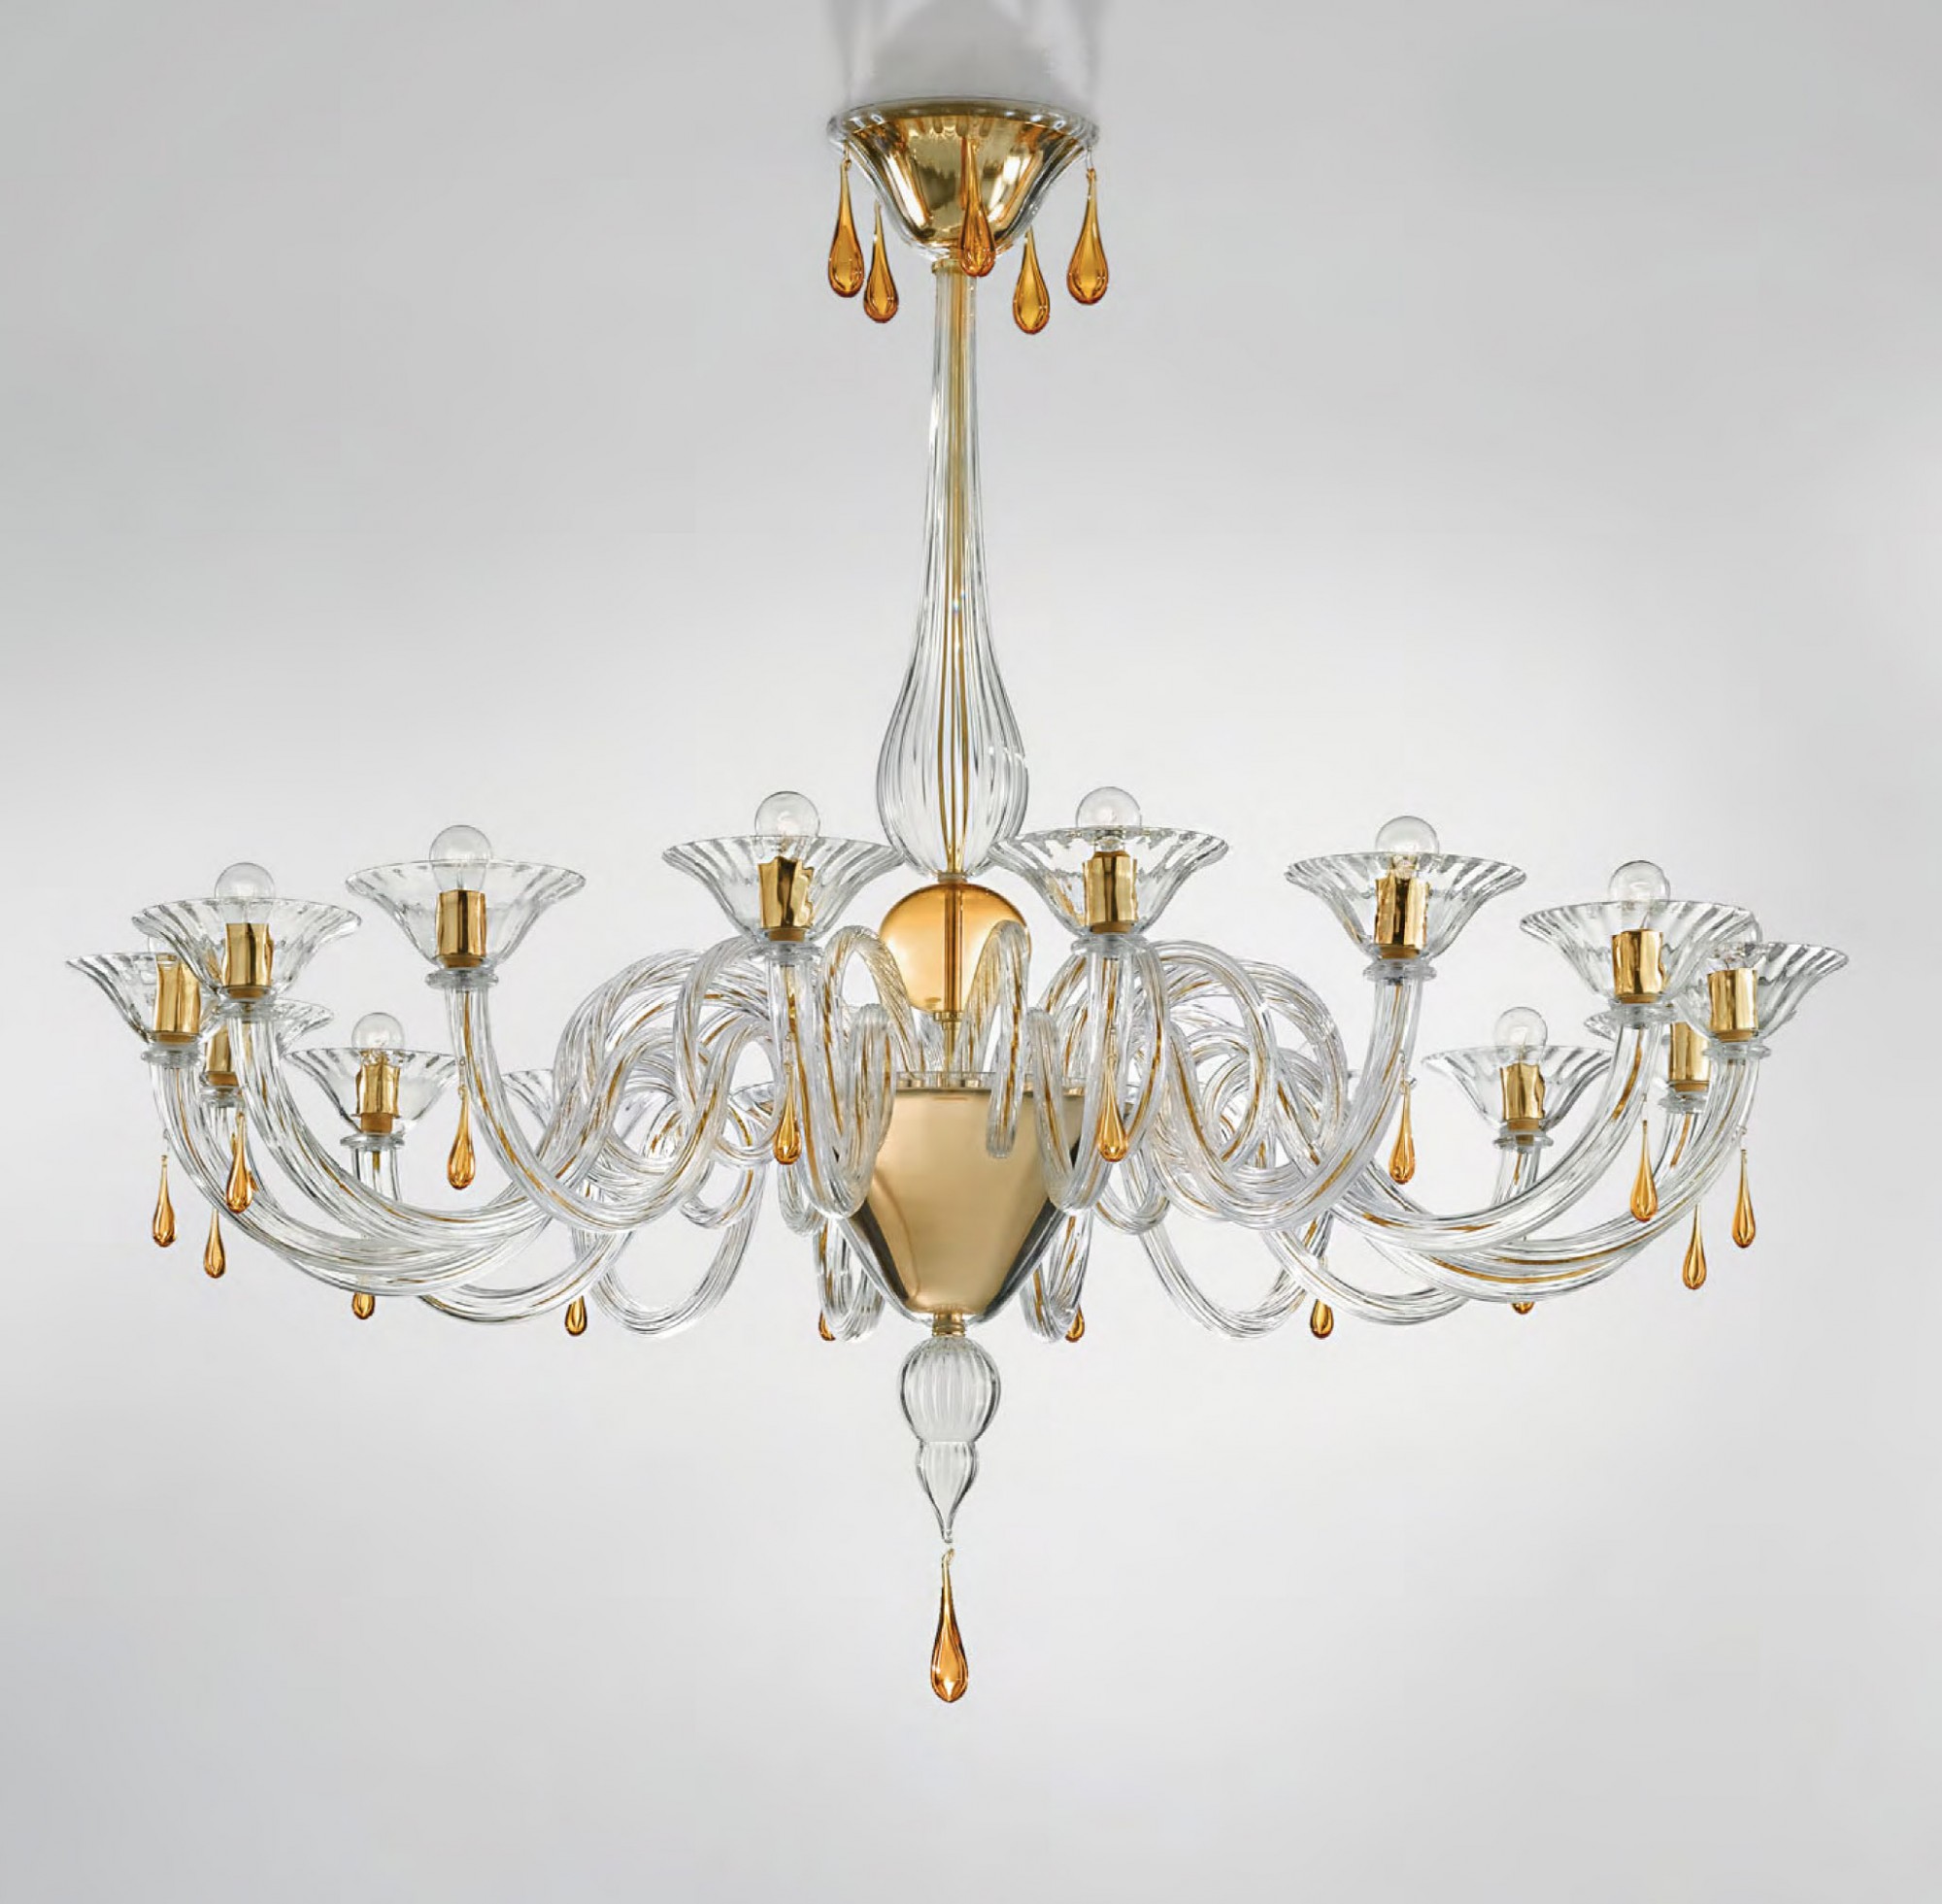 Modern Murano chandelier lighting clear glass and gold metal finish